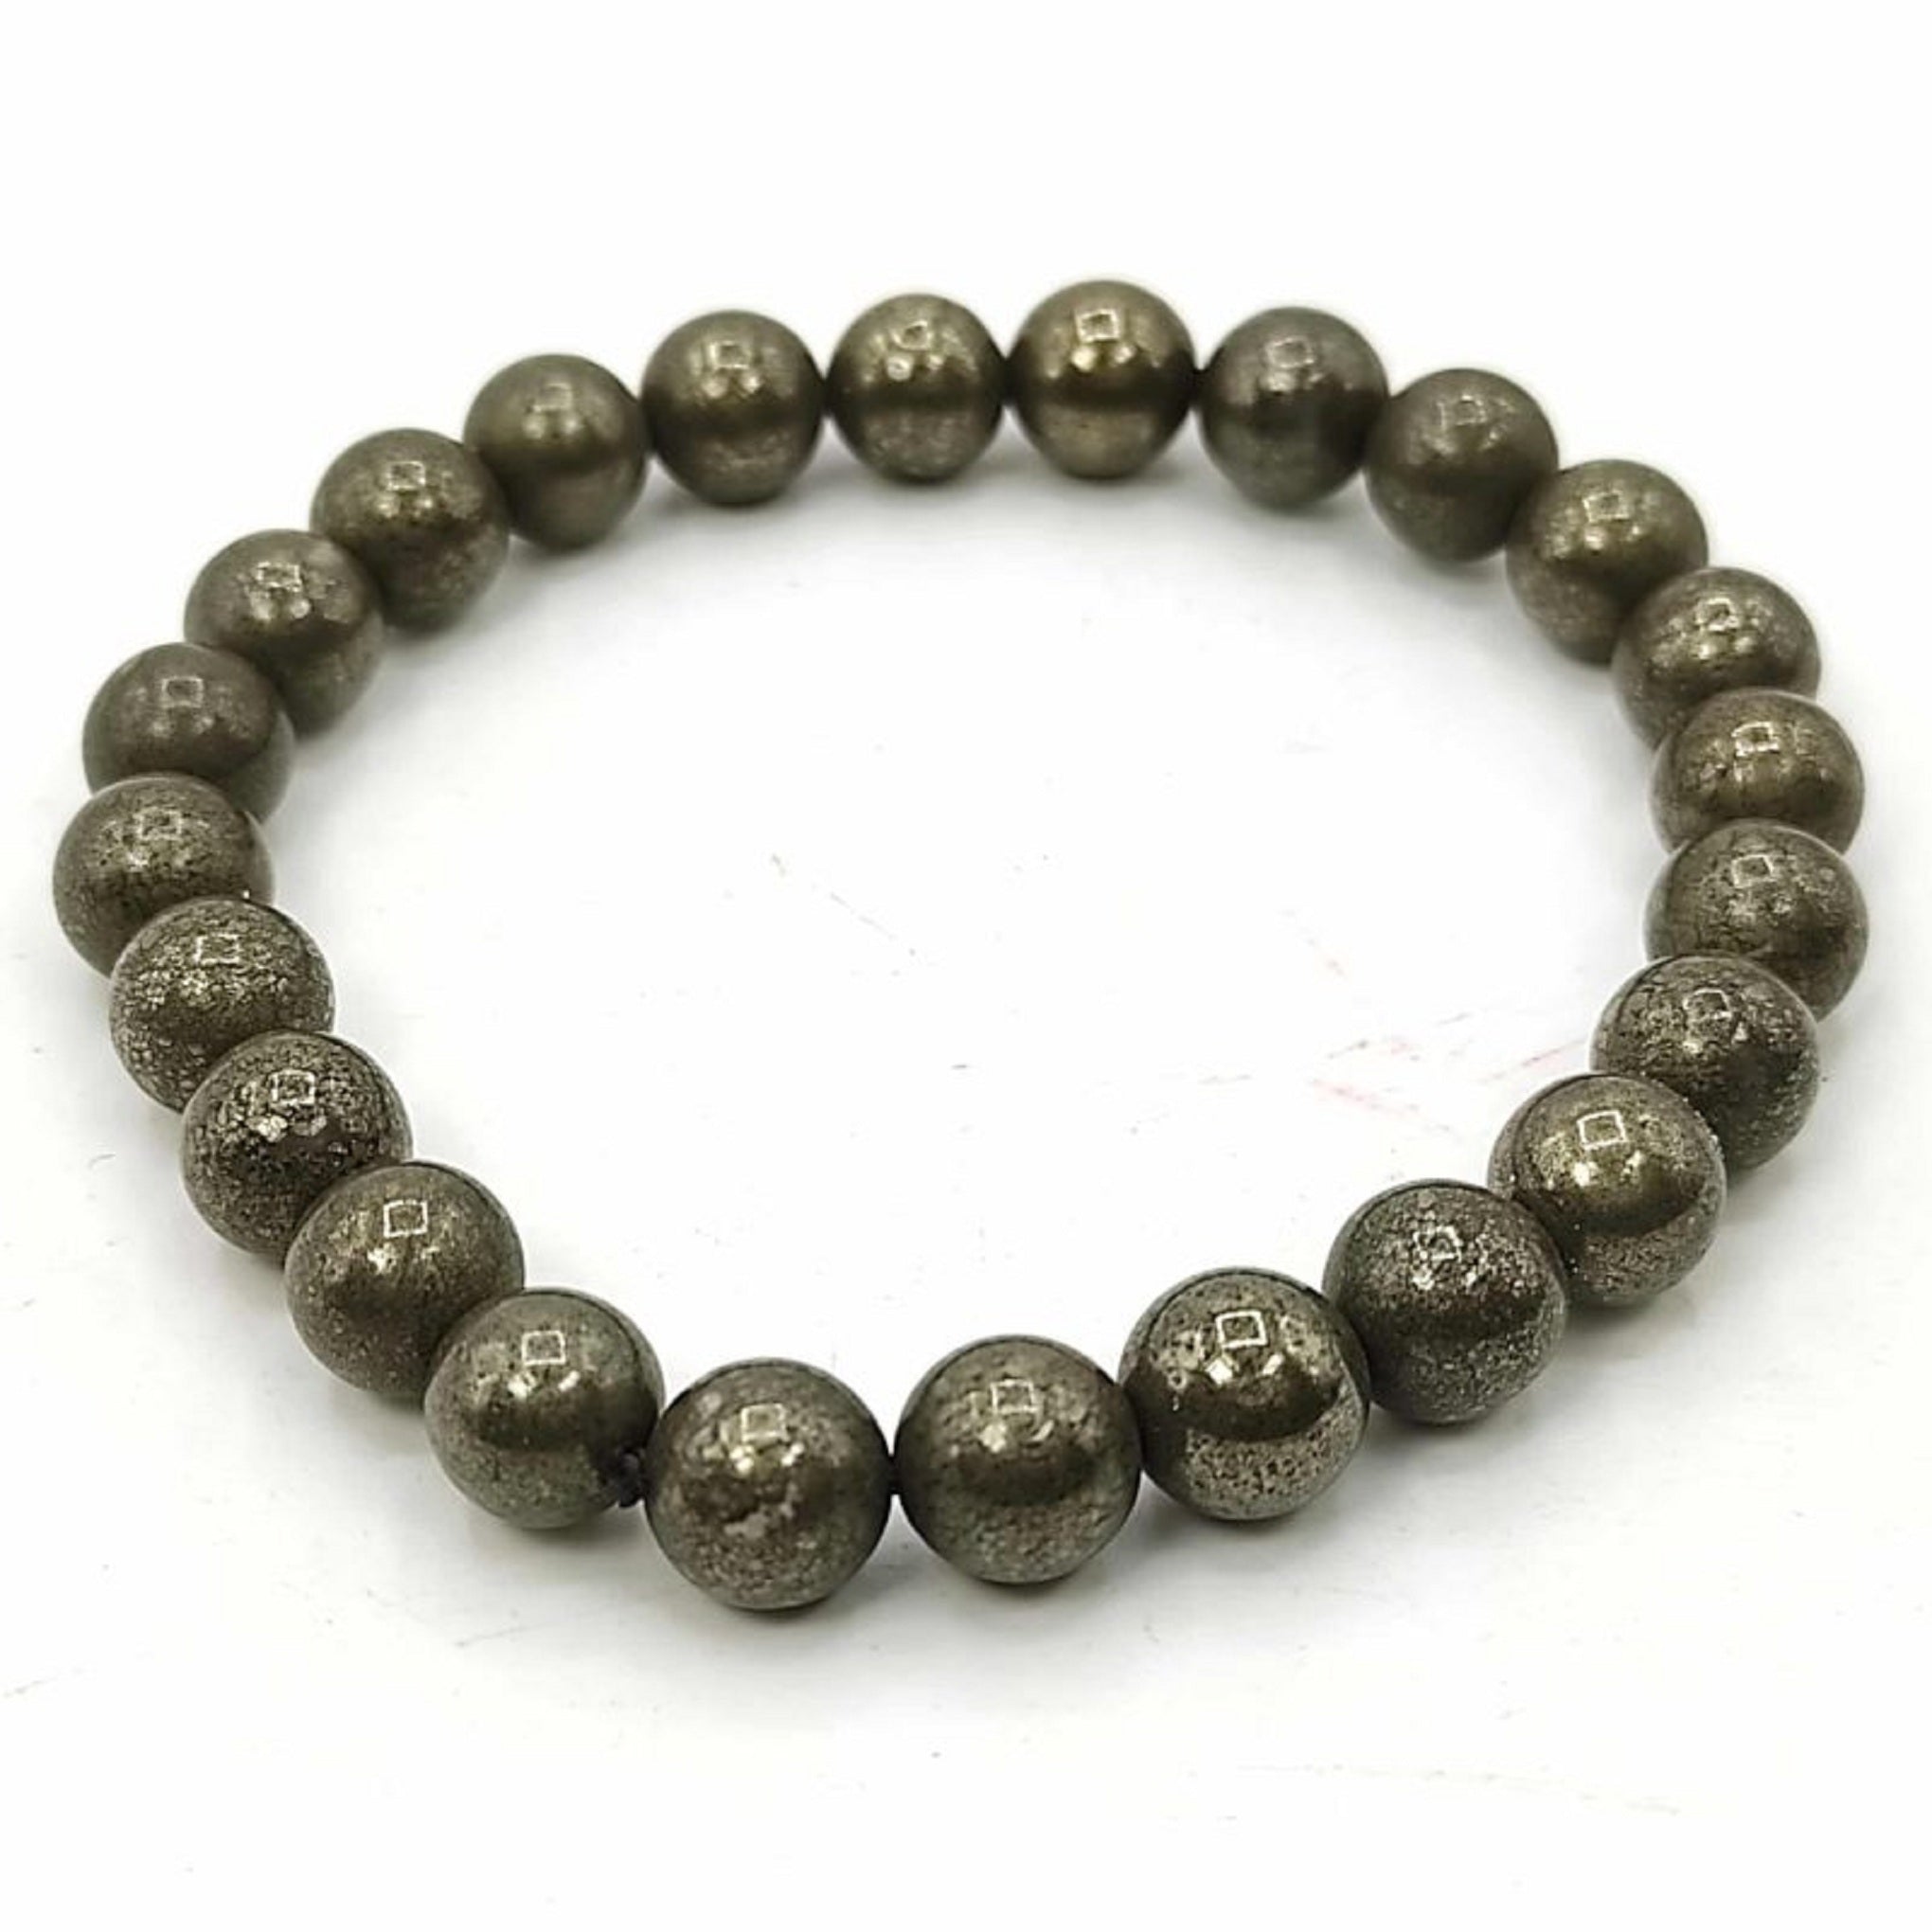 CERTIFIED  PYRITE CRYSTAL BRACELET- SILVER BLACK SPARKLING COLOUR MEDITATION HEALING ACCESSORY HOME OFFICE JEWELLERY GIFT